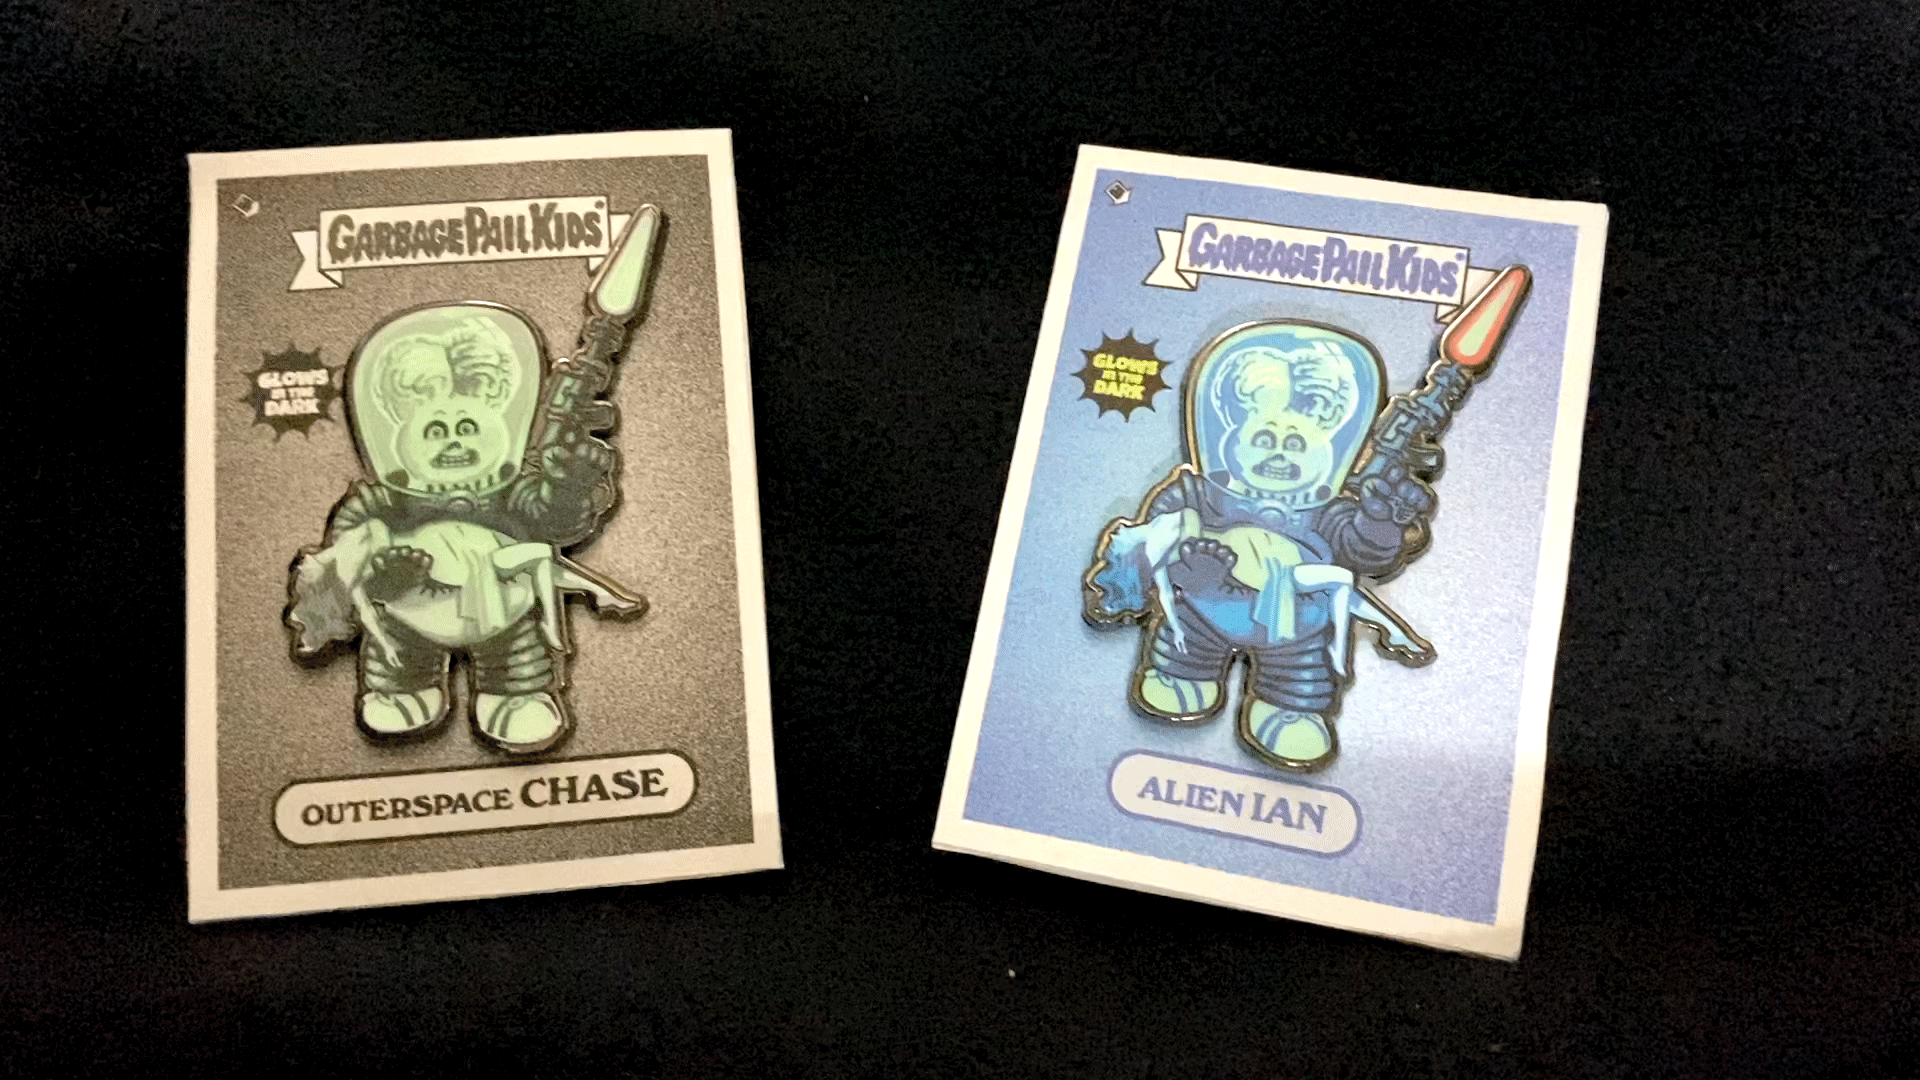 Garbage Pail Kids - Mars Attacks -  Alien Ian - Limited Edition GLOW IN THE DARK Enamel Pin and Exclusive Promo Trading Card